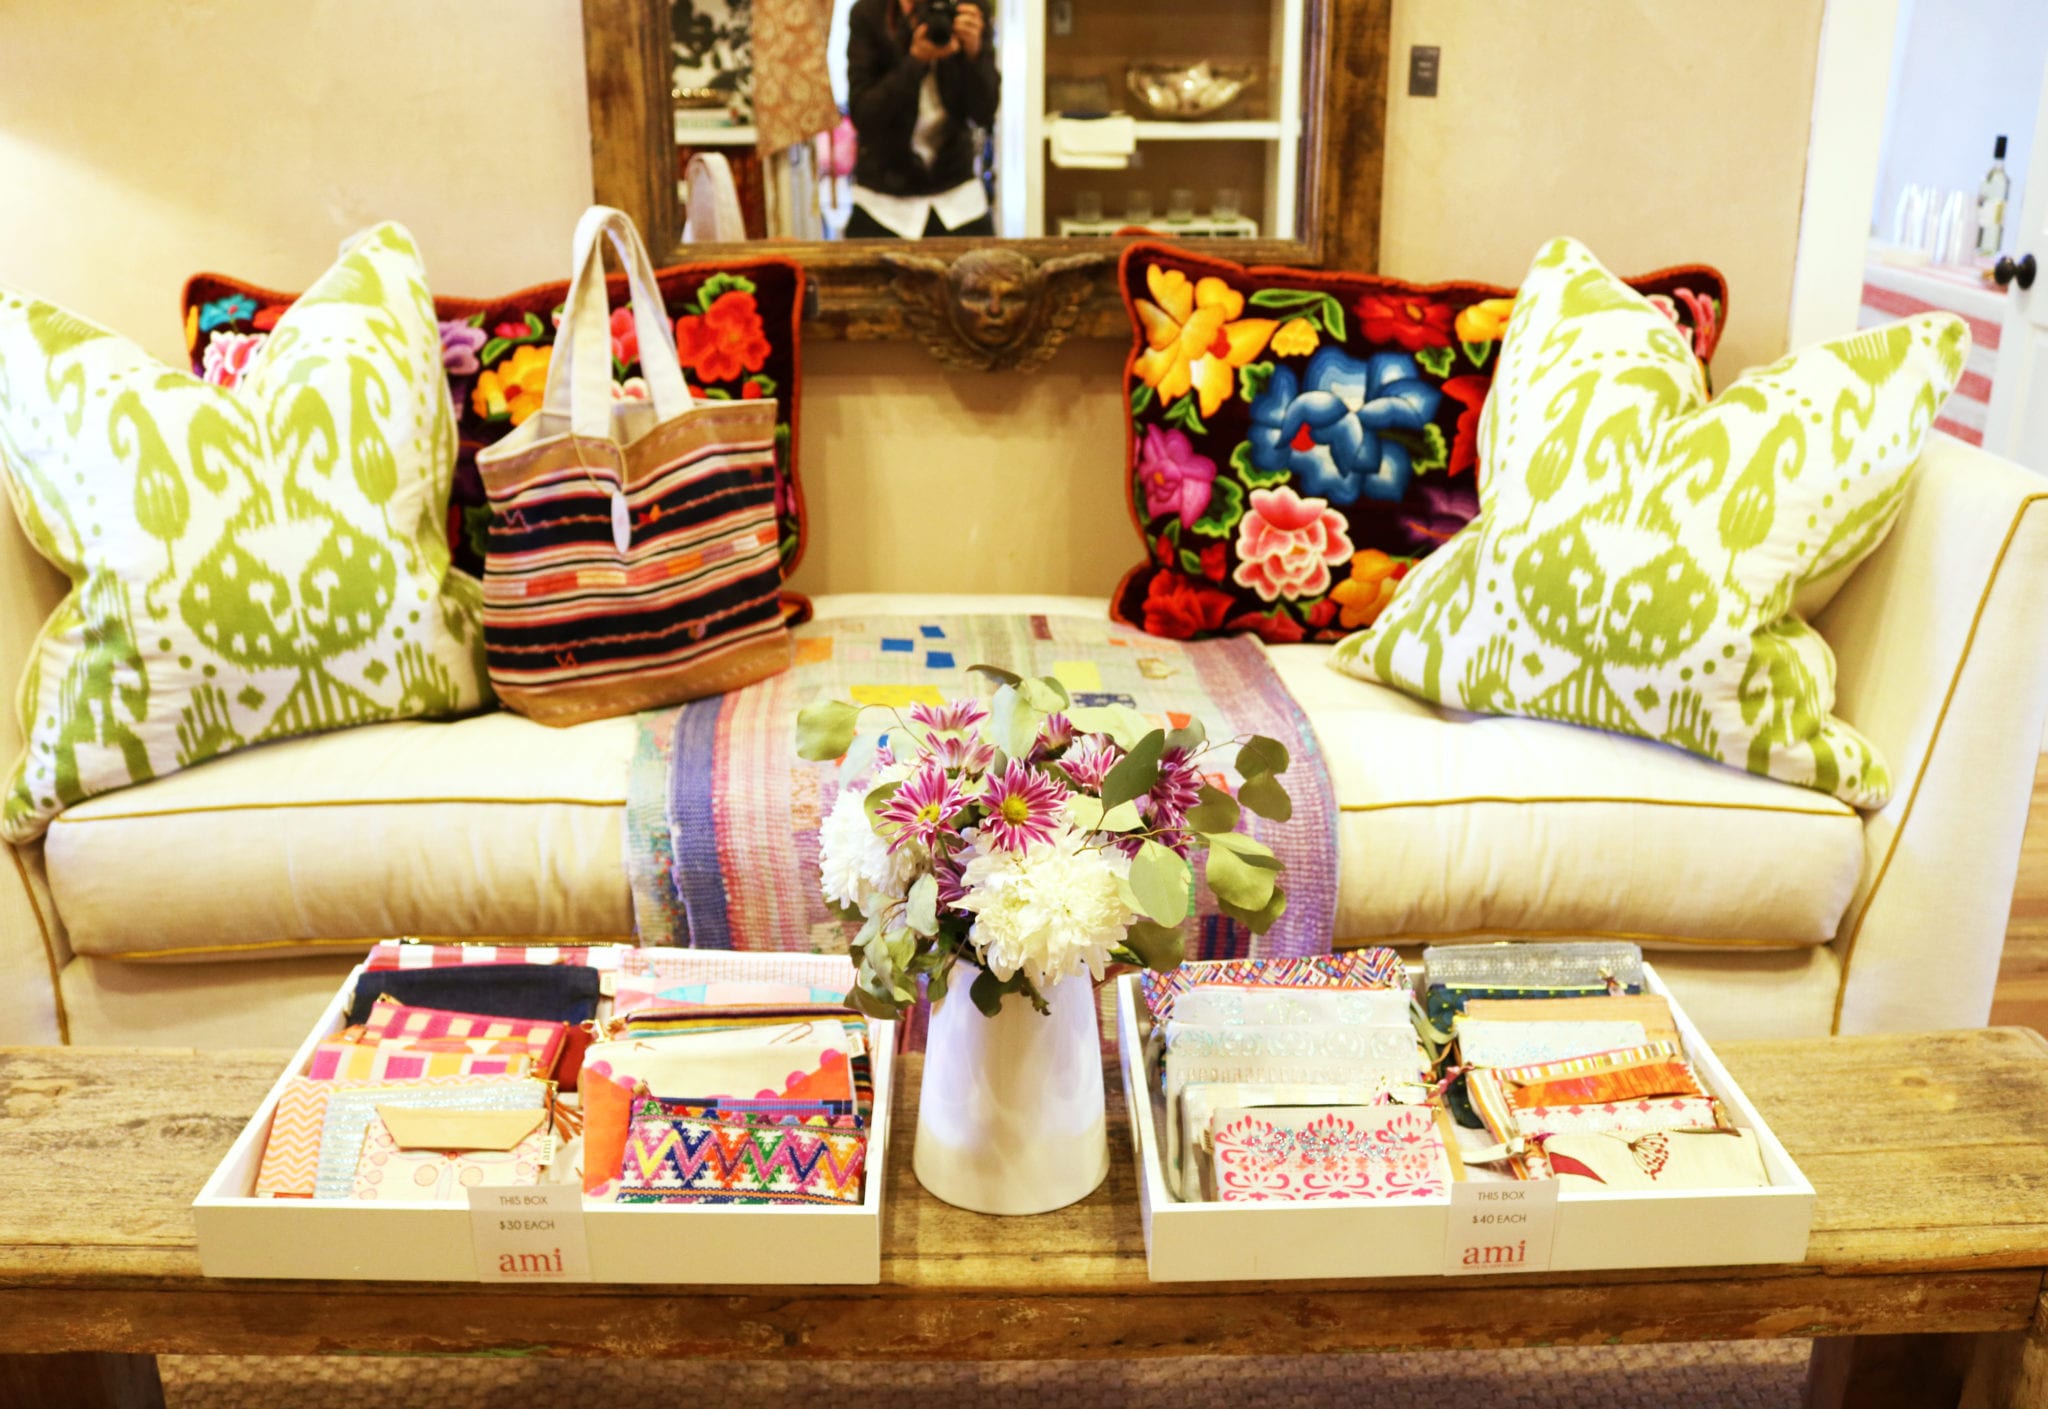 Sofa with multiple colorful bohemian pillows and coffee table with global patterned texture samples in trays